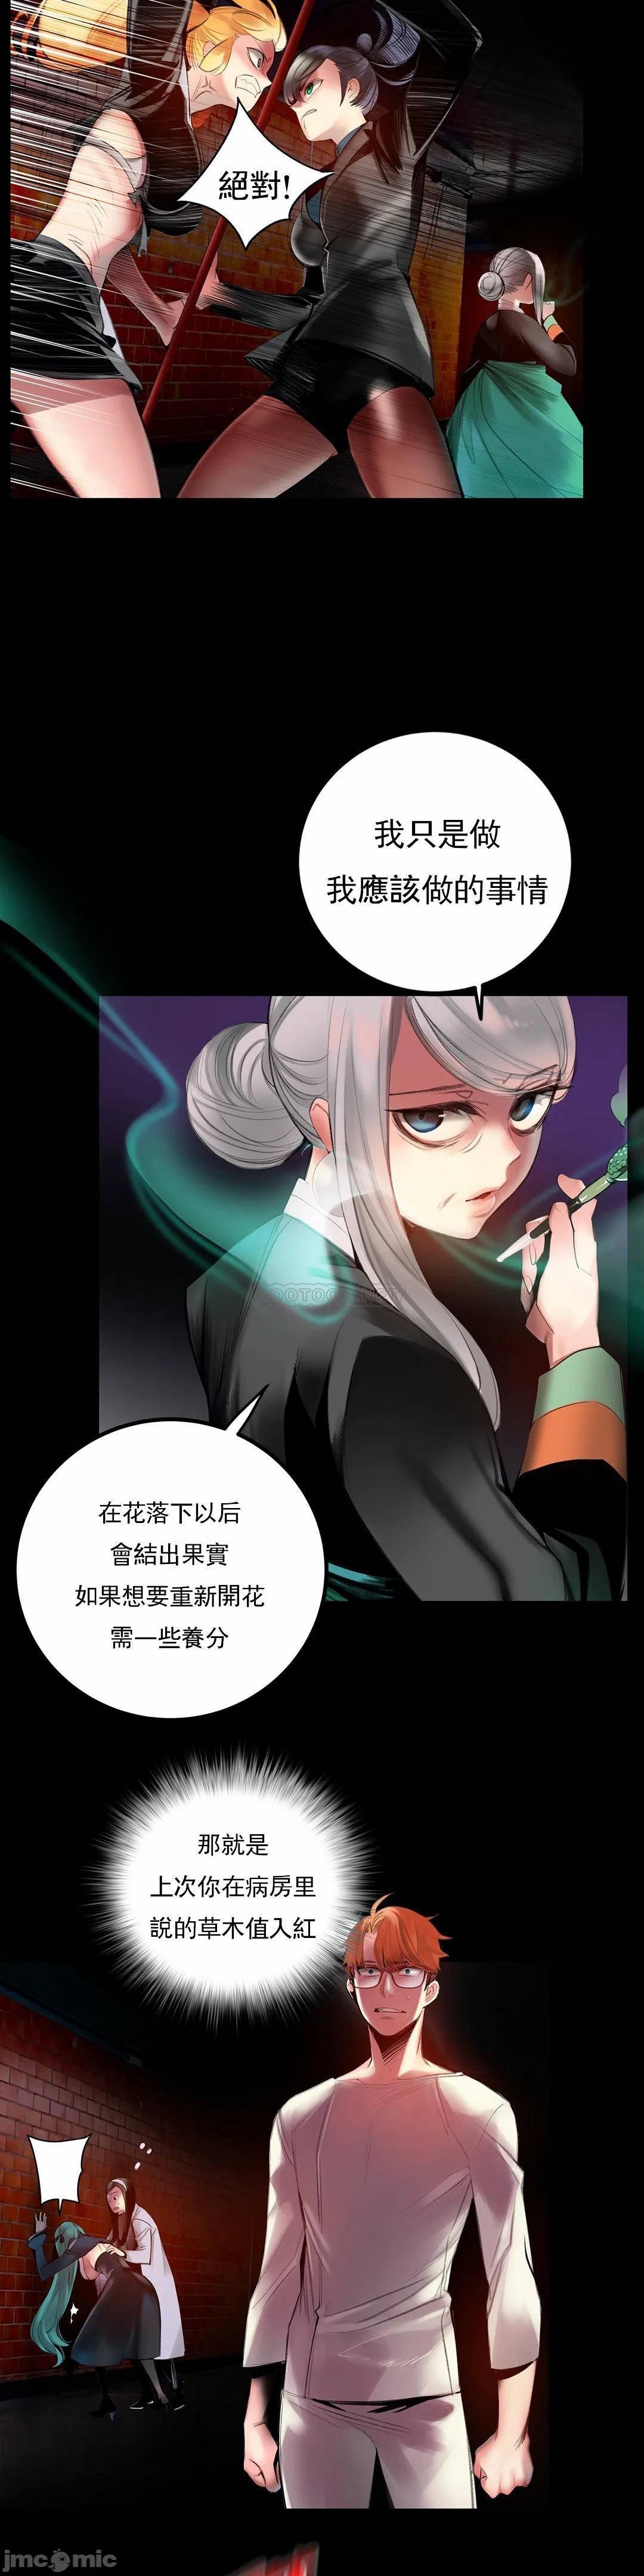 [Juder] Lilith`s Cord (第二季) Ch.77-93 end [Chinese] 376